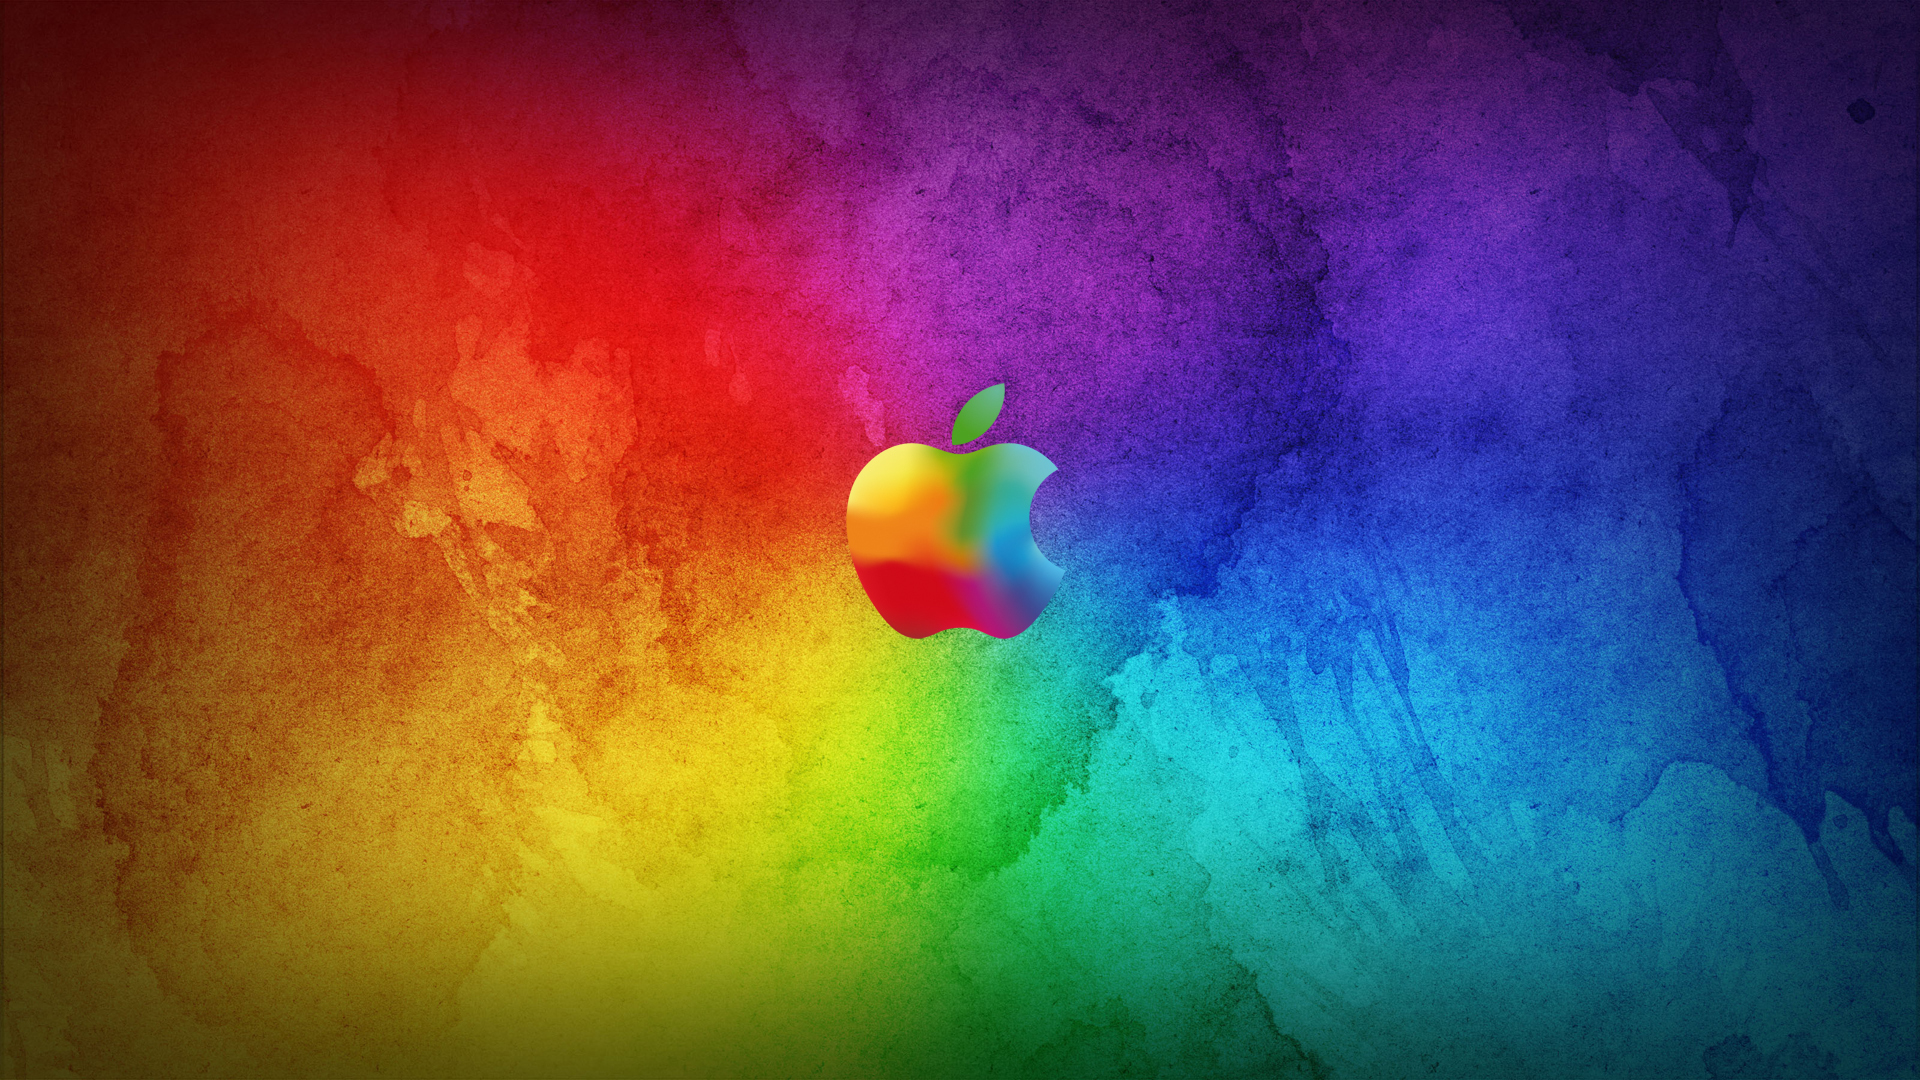 Apple Mac Os Tech Puters Logo Symbal Color Wallpaper Background